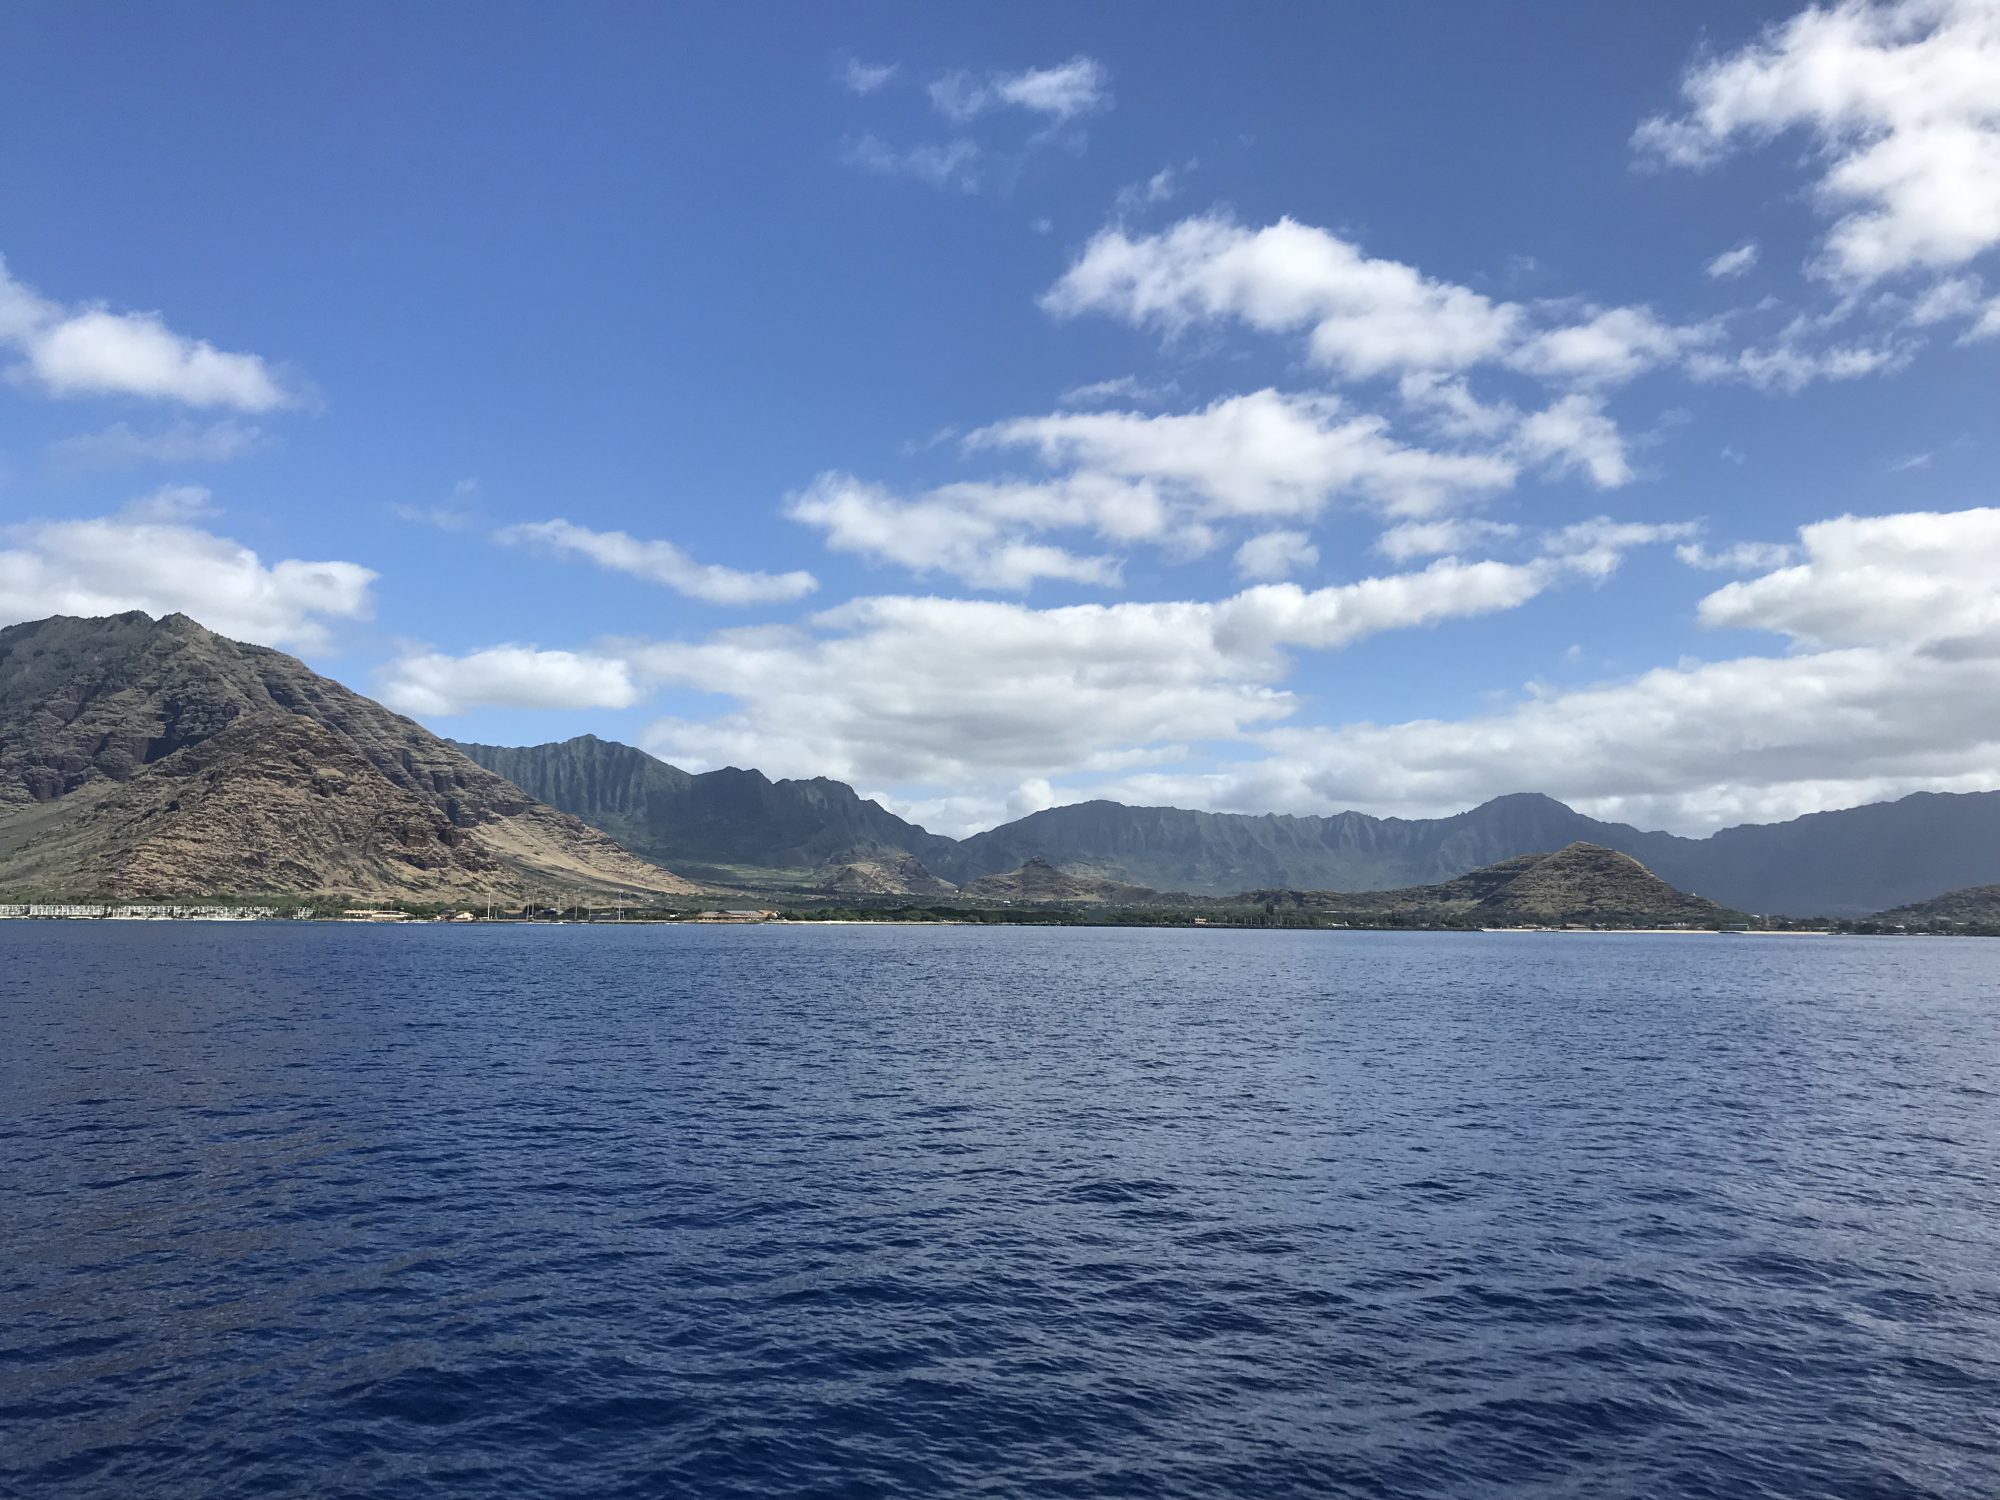 Waianae Coast view from the ocean